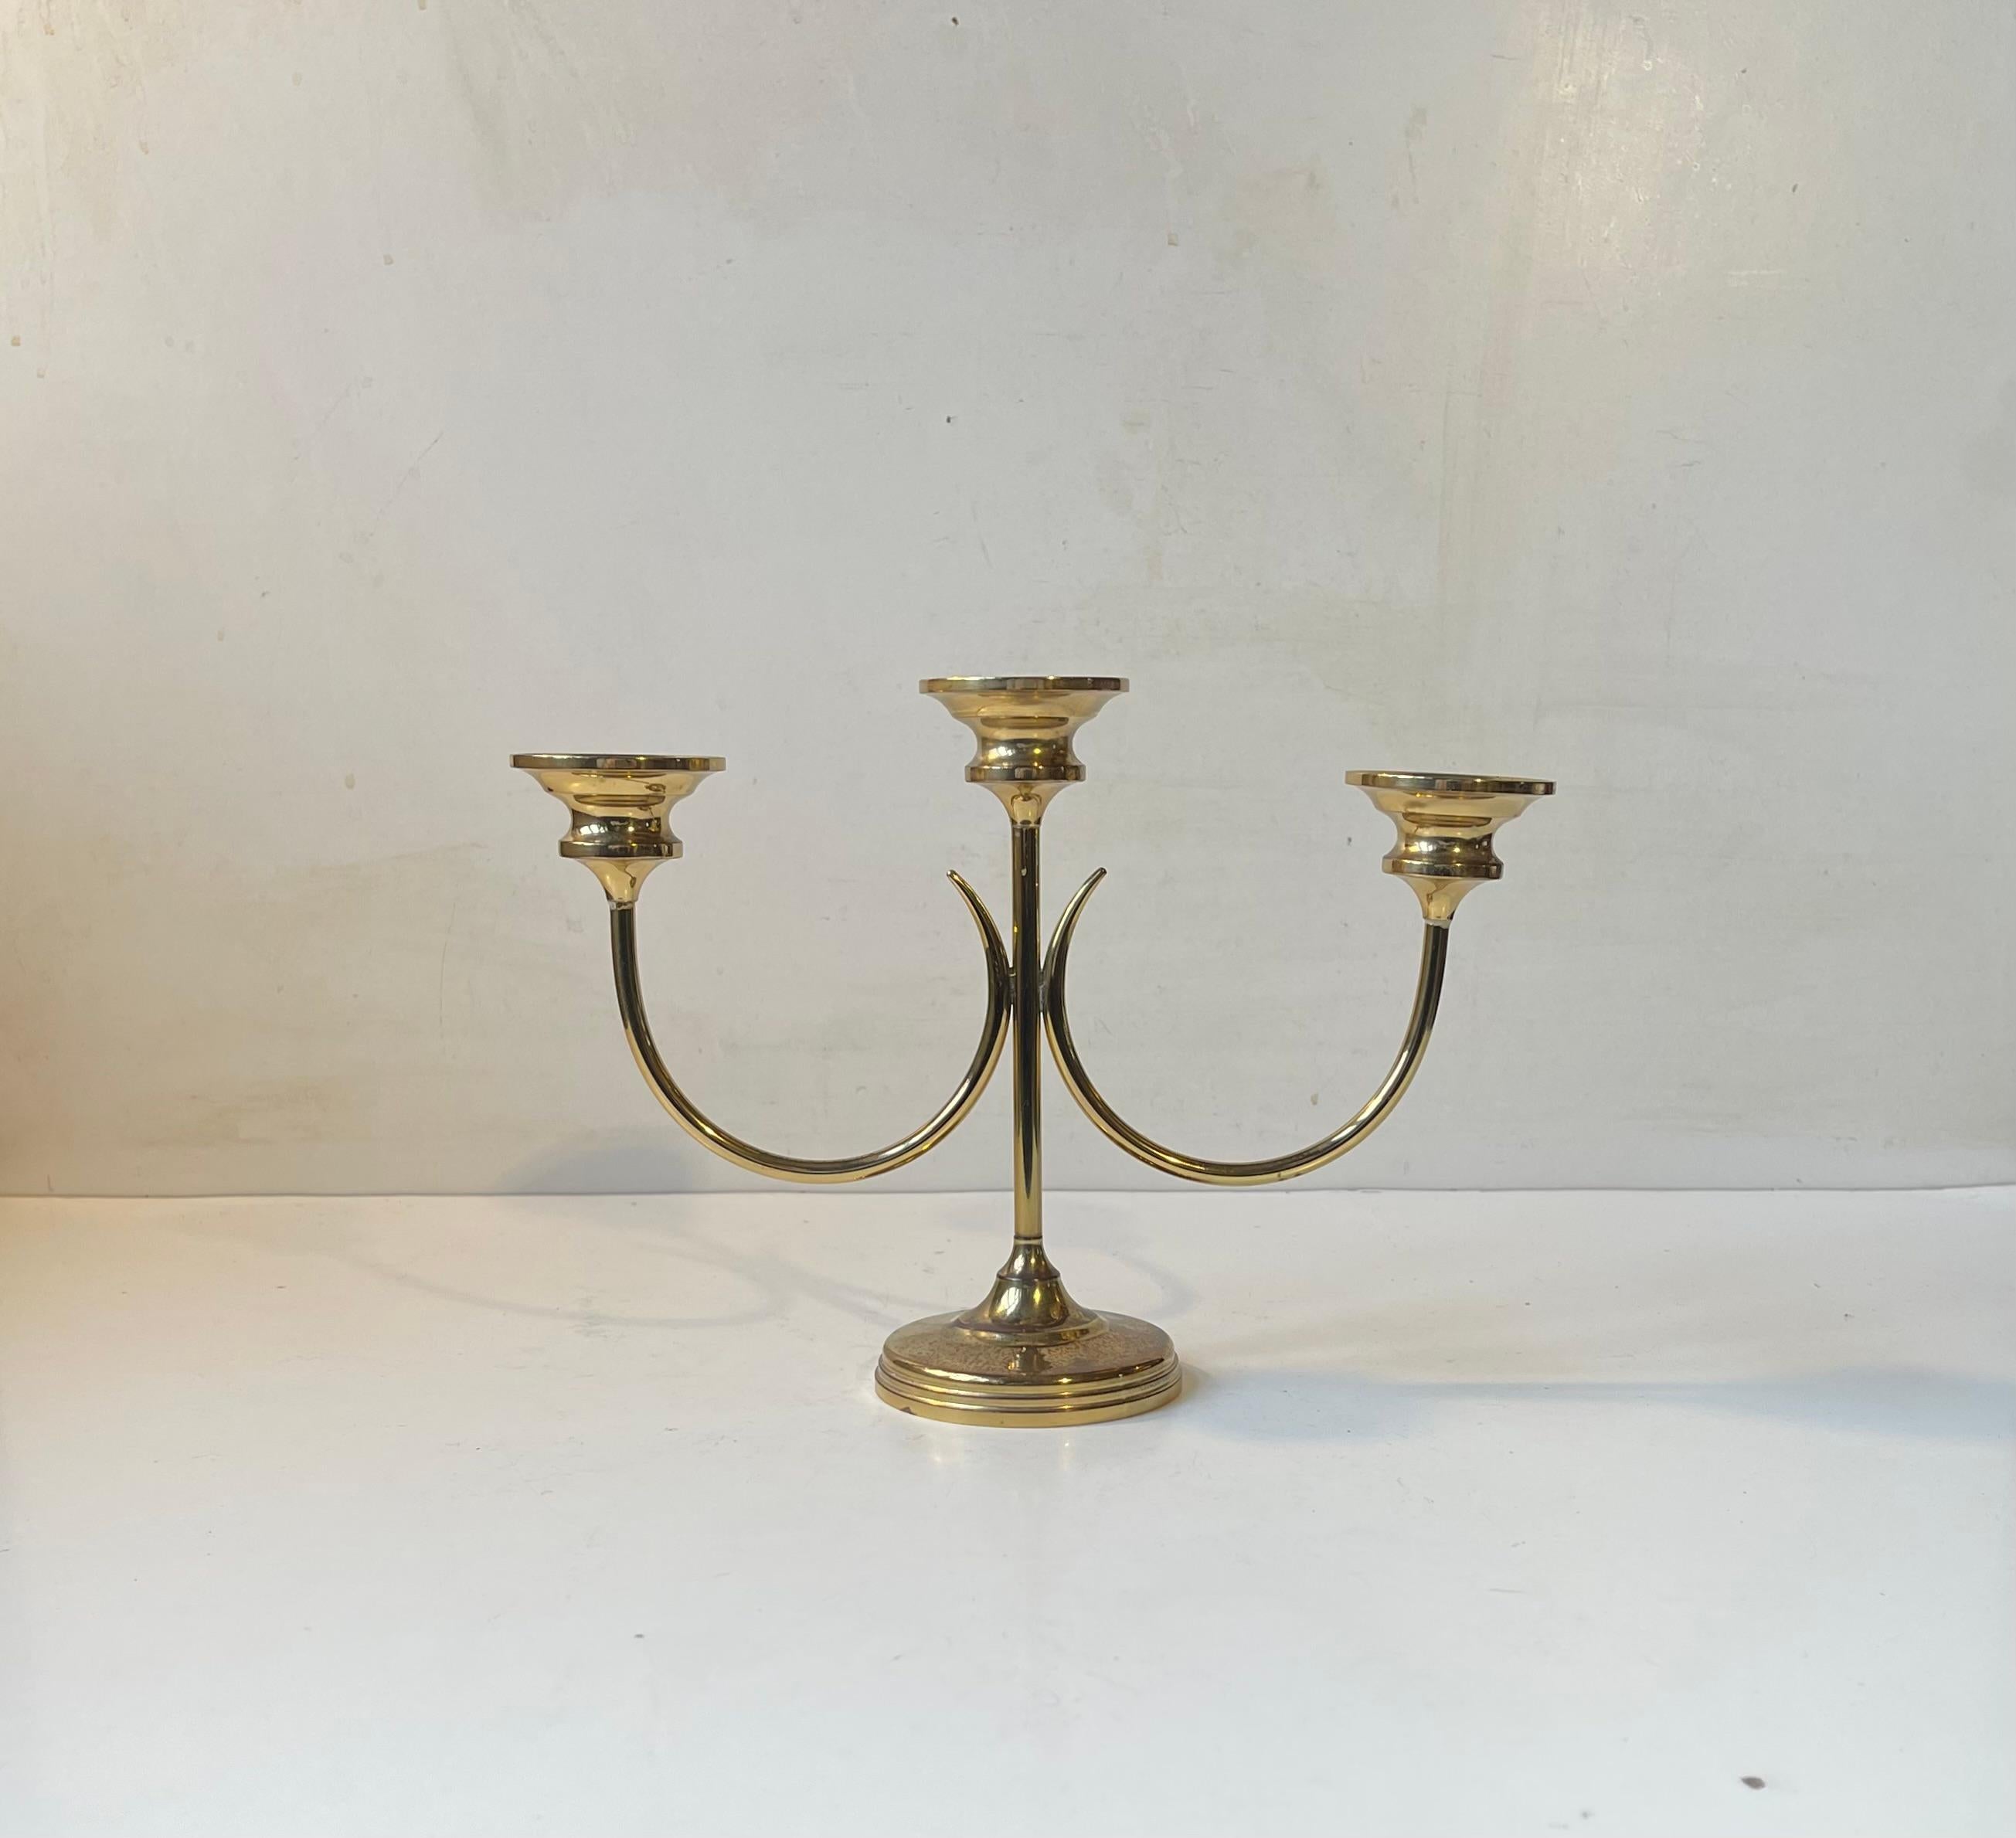 Stylized lily candelabra in solid brass. Its to be fitted with 3 regular sized candles. Designed by Swedish Gunnar Ander circa 1960-70. Reminiscent in style to Ivar Ålenius Björk iconic candlesticks. Measurements: H: 18 cm, W: 24,4 cm, Diameter